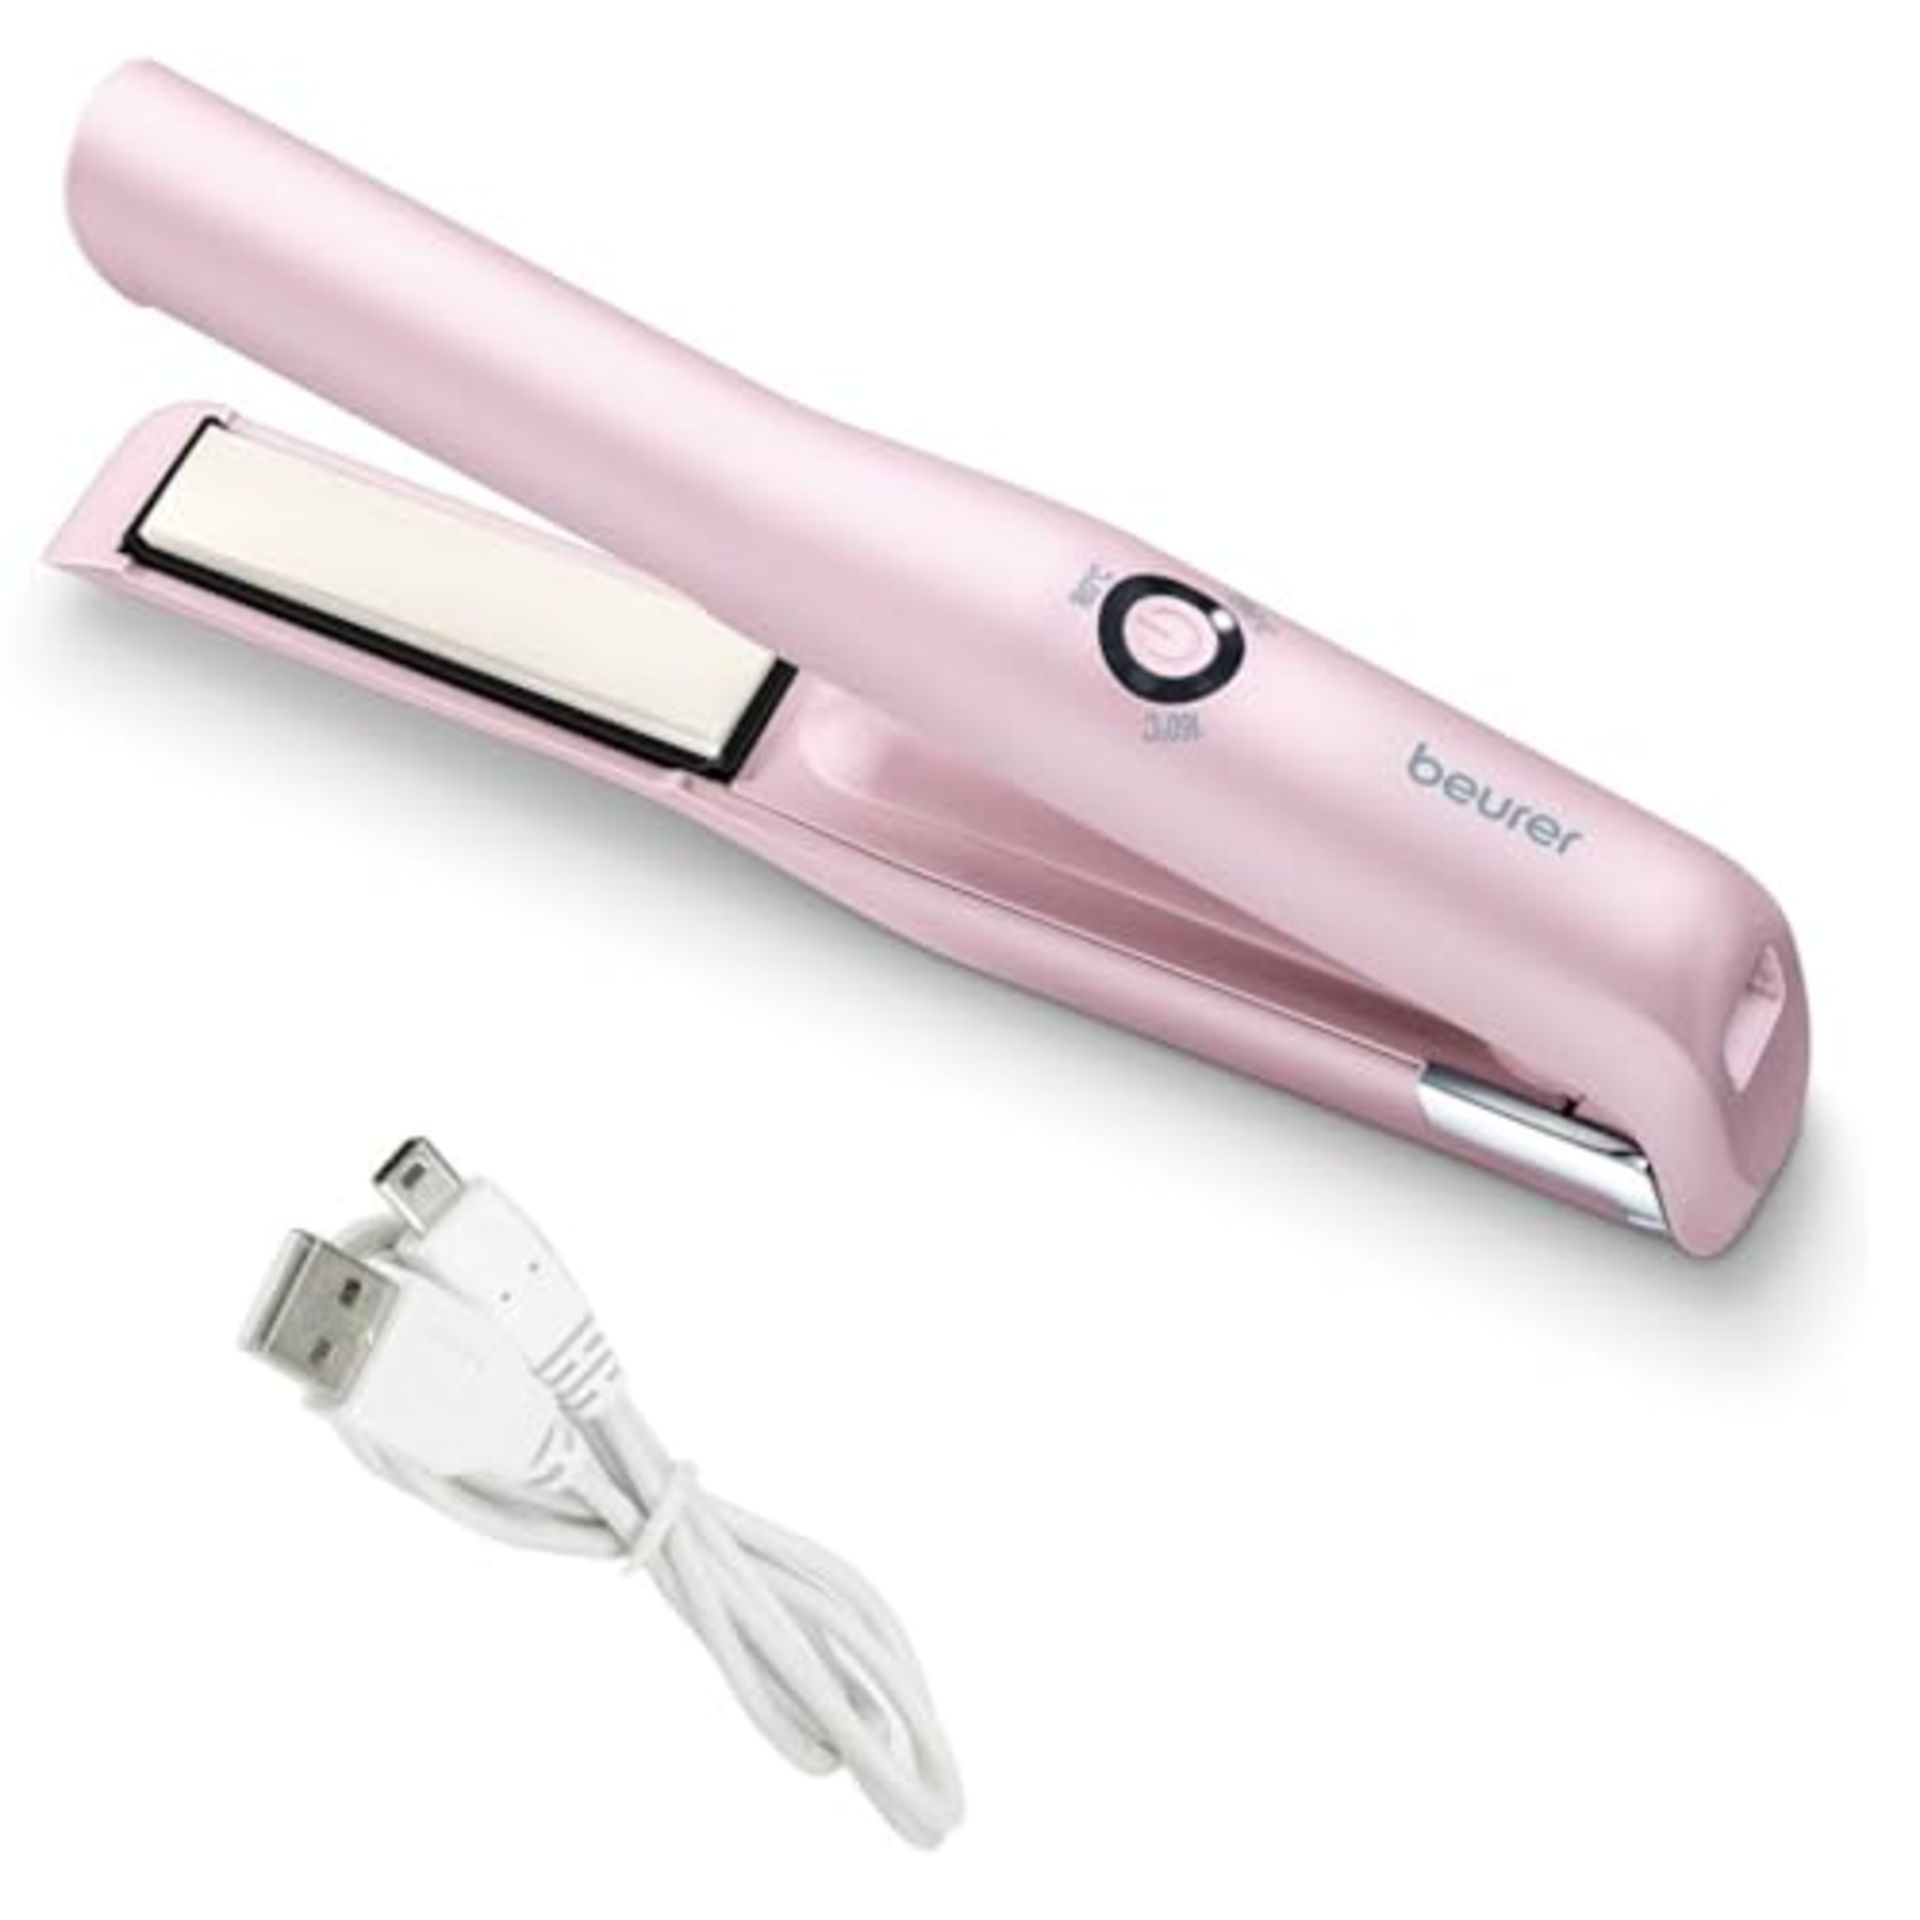 Beurer HS20 Cordless Rechargeable Hair Straightener With USB Charging Cable, 3 Fast-He